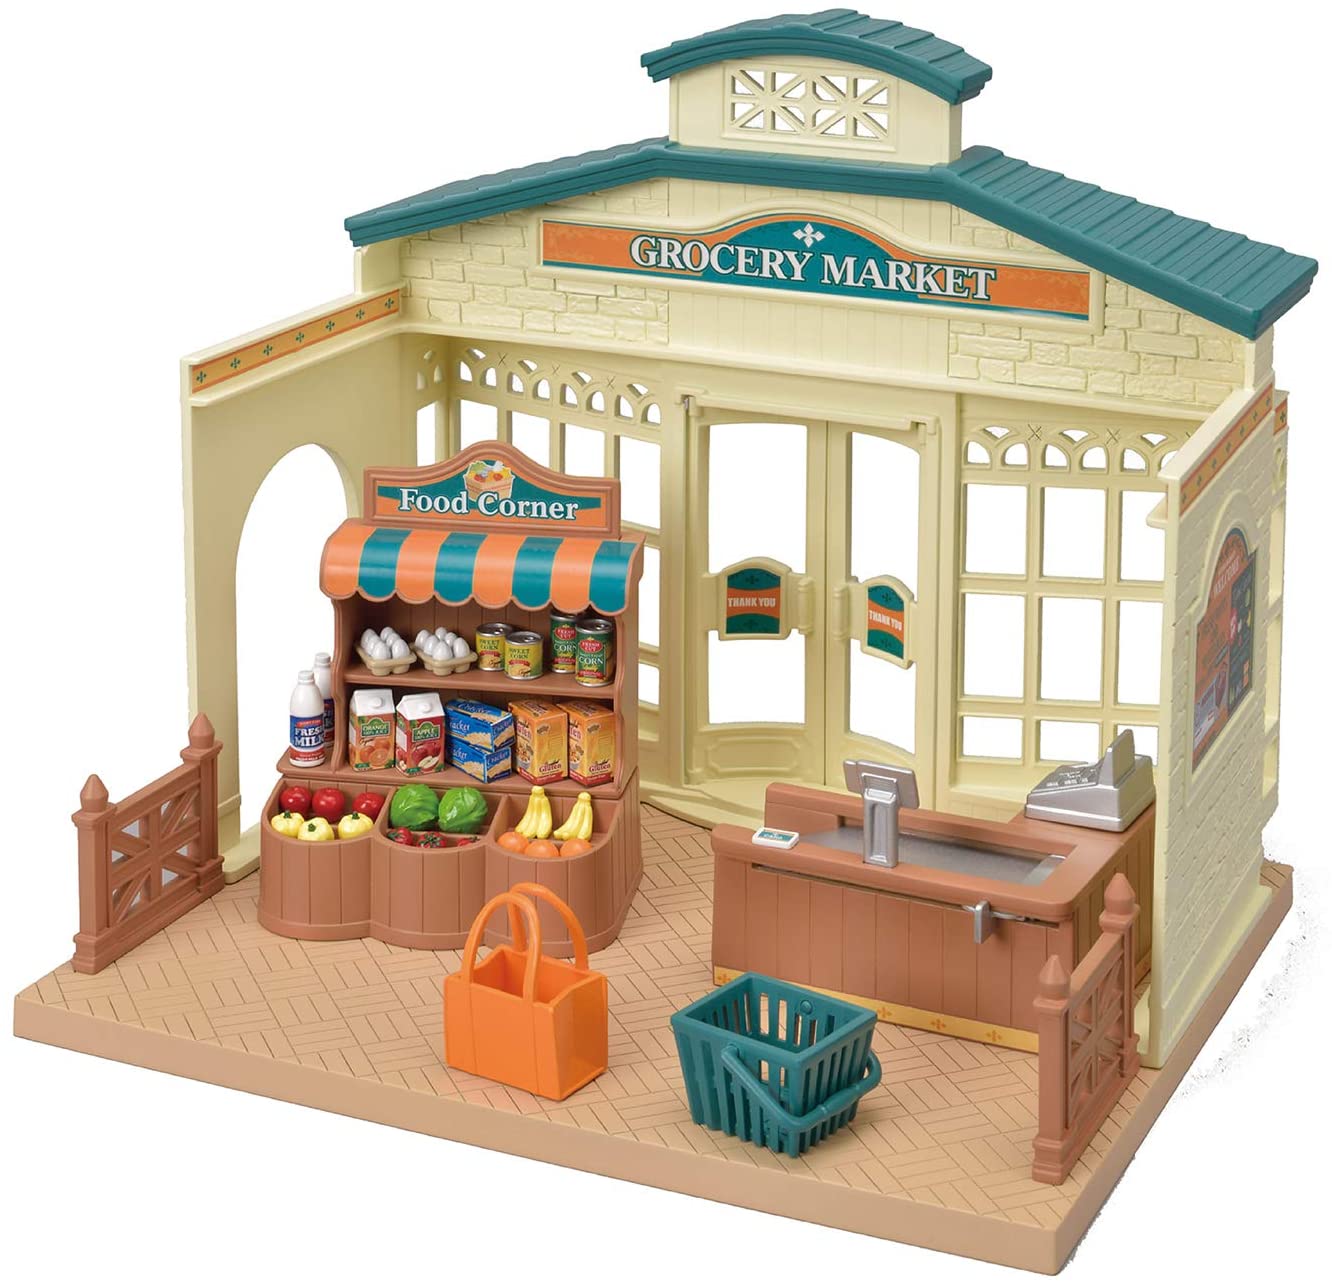 Grocery Market by Calico Critters #CC1788